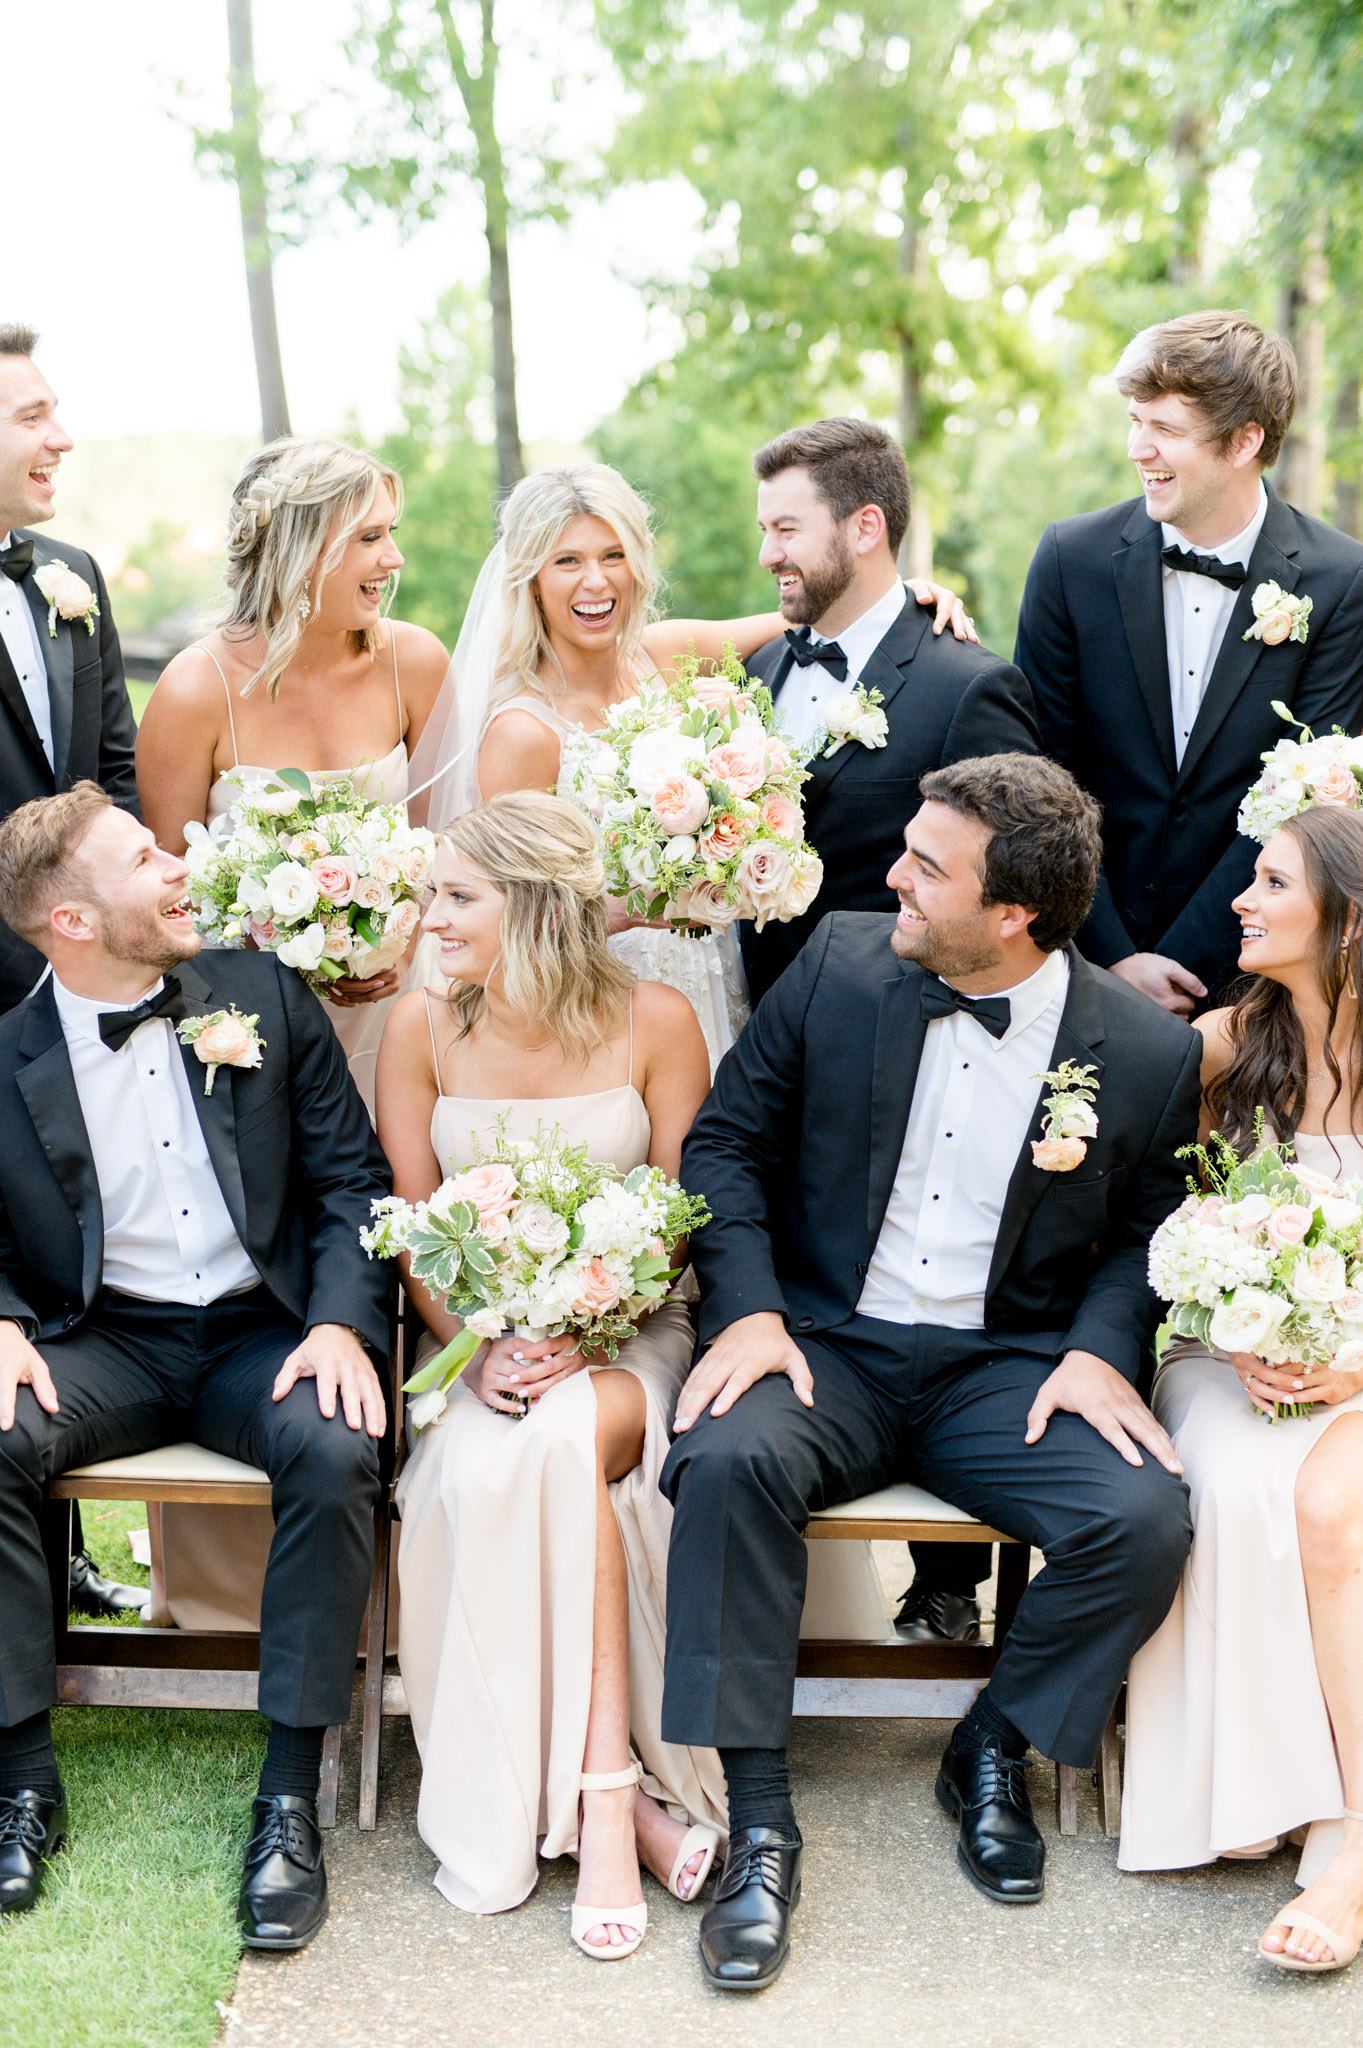 Bride and groom laugh while surrounded by their wedding party.